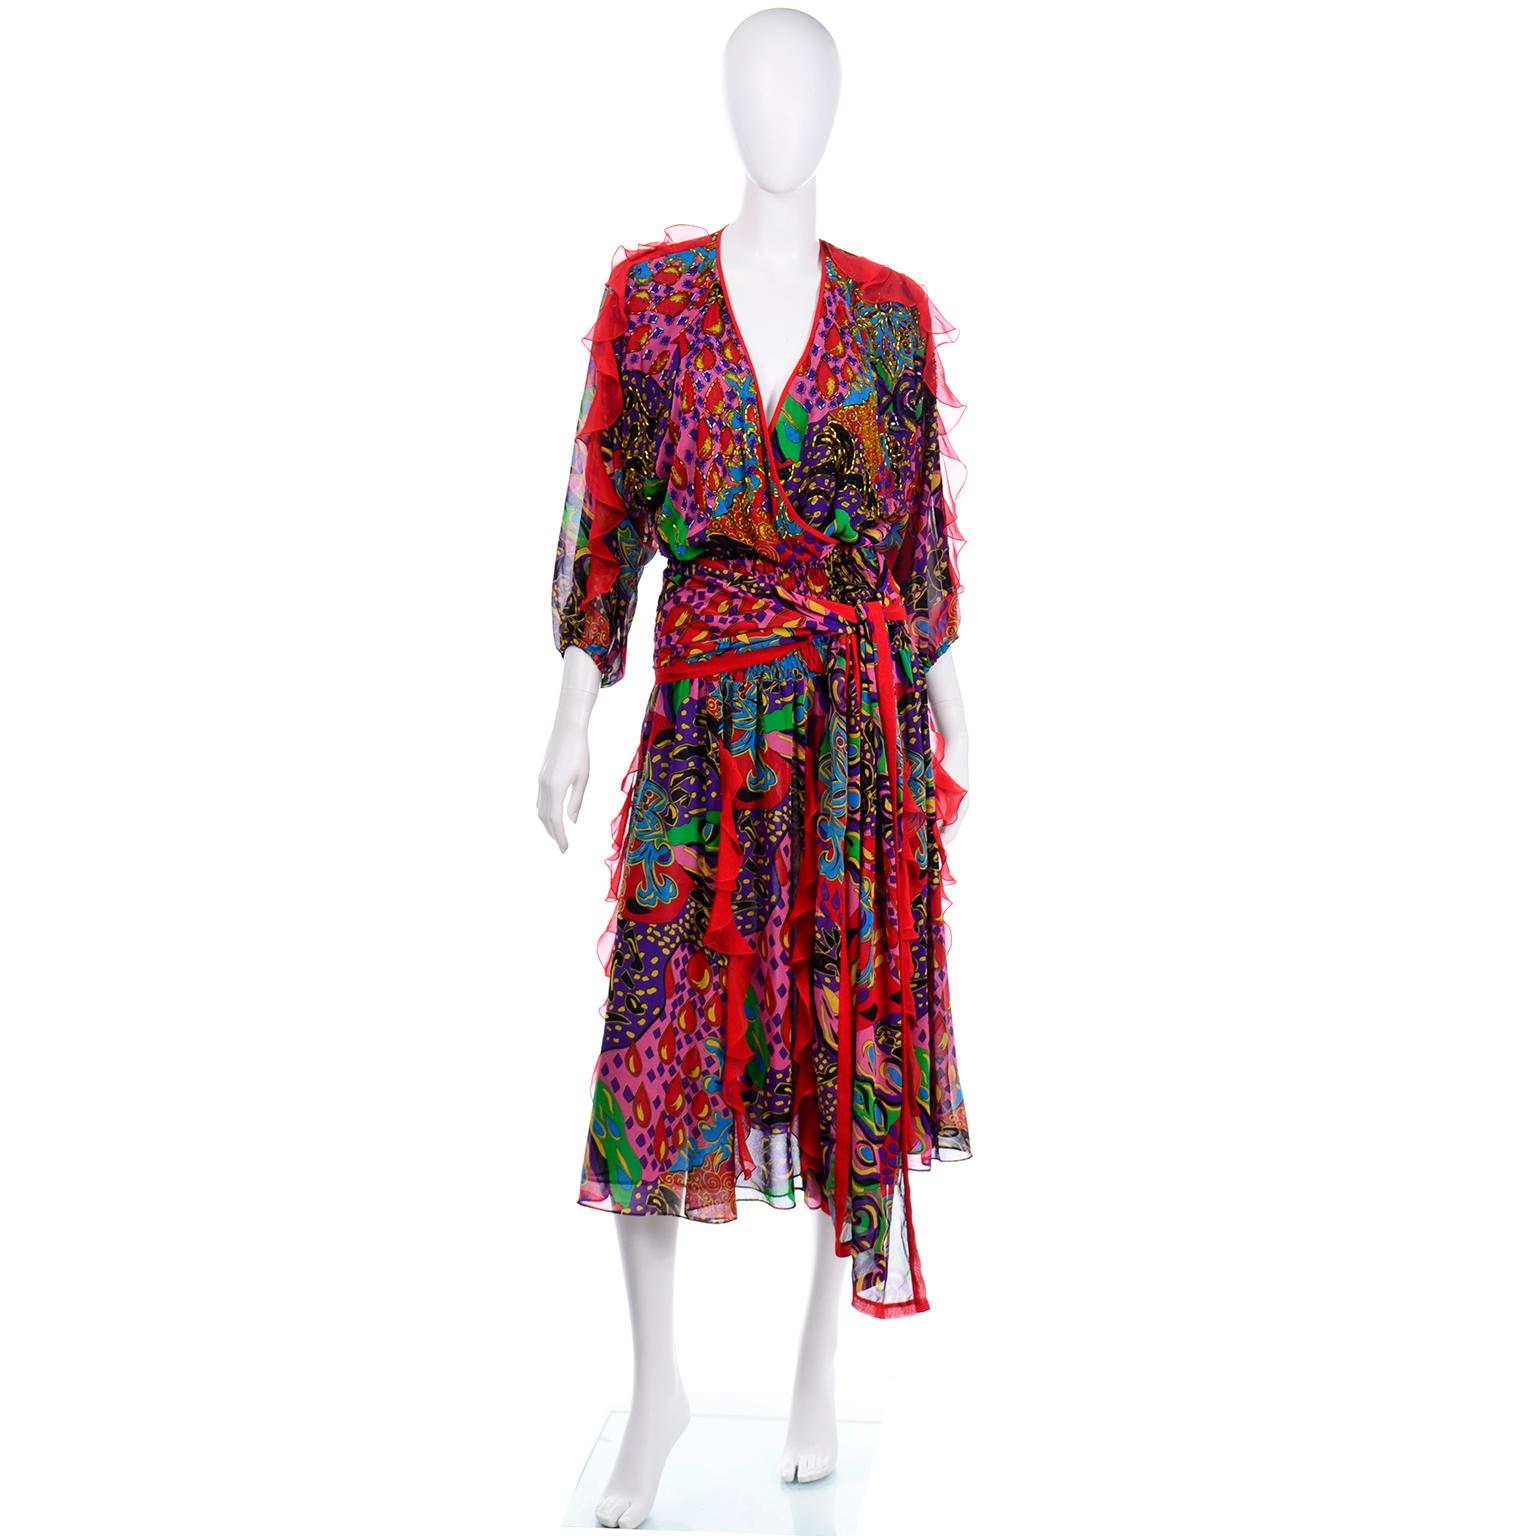 This is a fun bold and colorful dress designed by Diane Freis in the 1980's. The multi colored abstract pattern has unique swirls and teardrops accentuated with beads and sequins on the bodice, as well as sheer red ruffles that go down the arms as